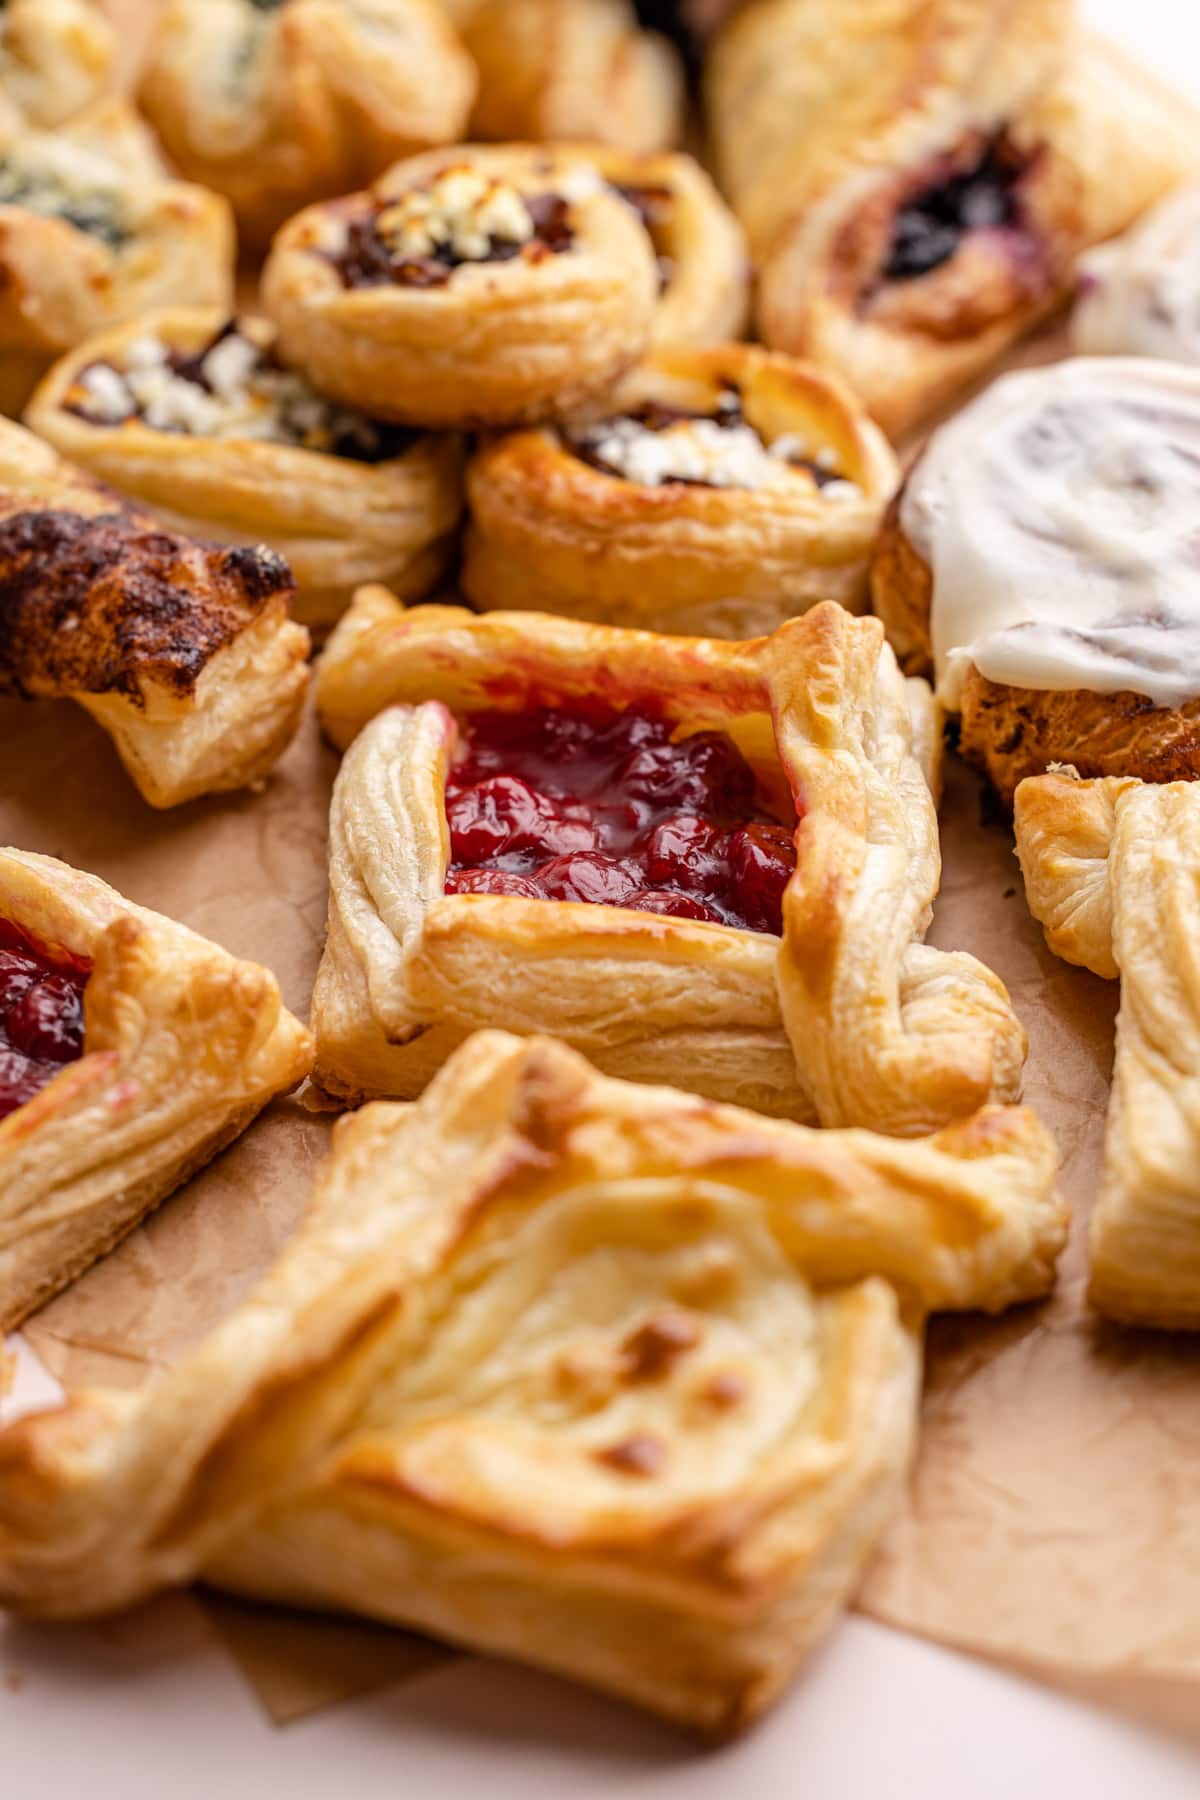 Baked pastries made with homemade puff pastry.